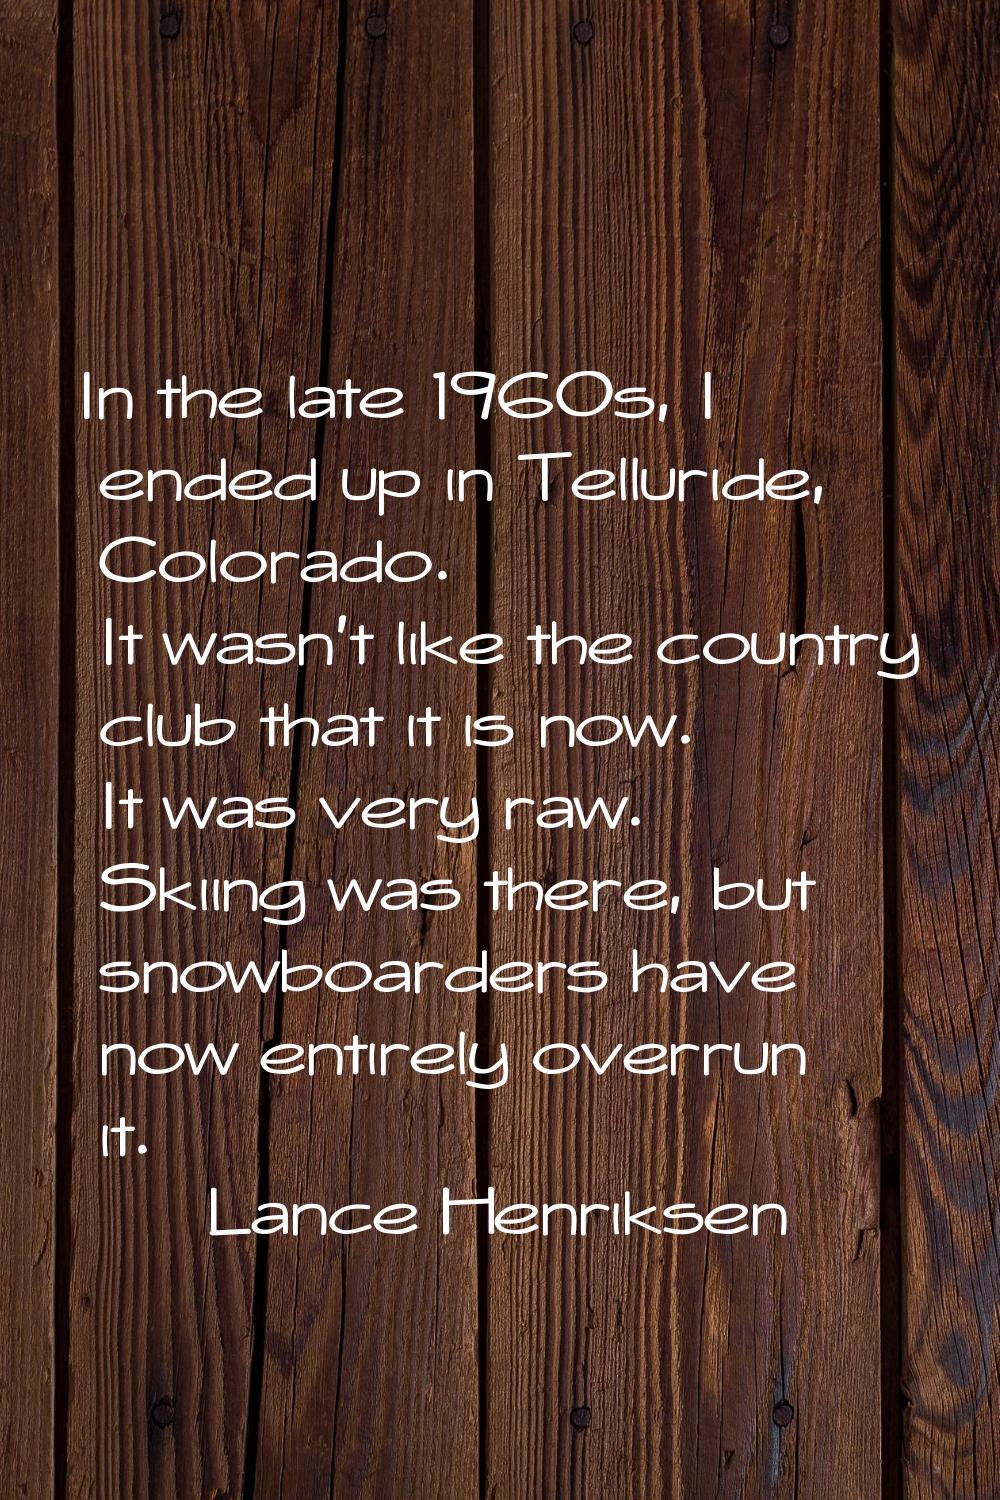 In the late 1960s, I ended up in Telluride, Colorado. It wasn't like the country club that it is no